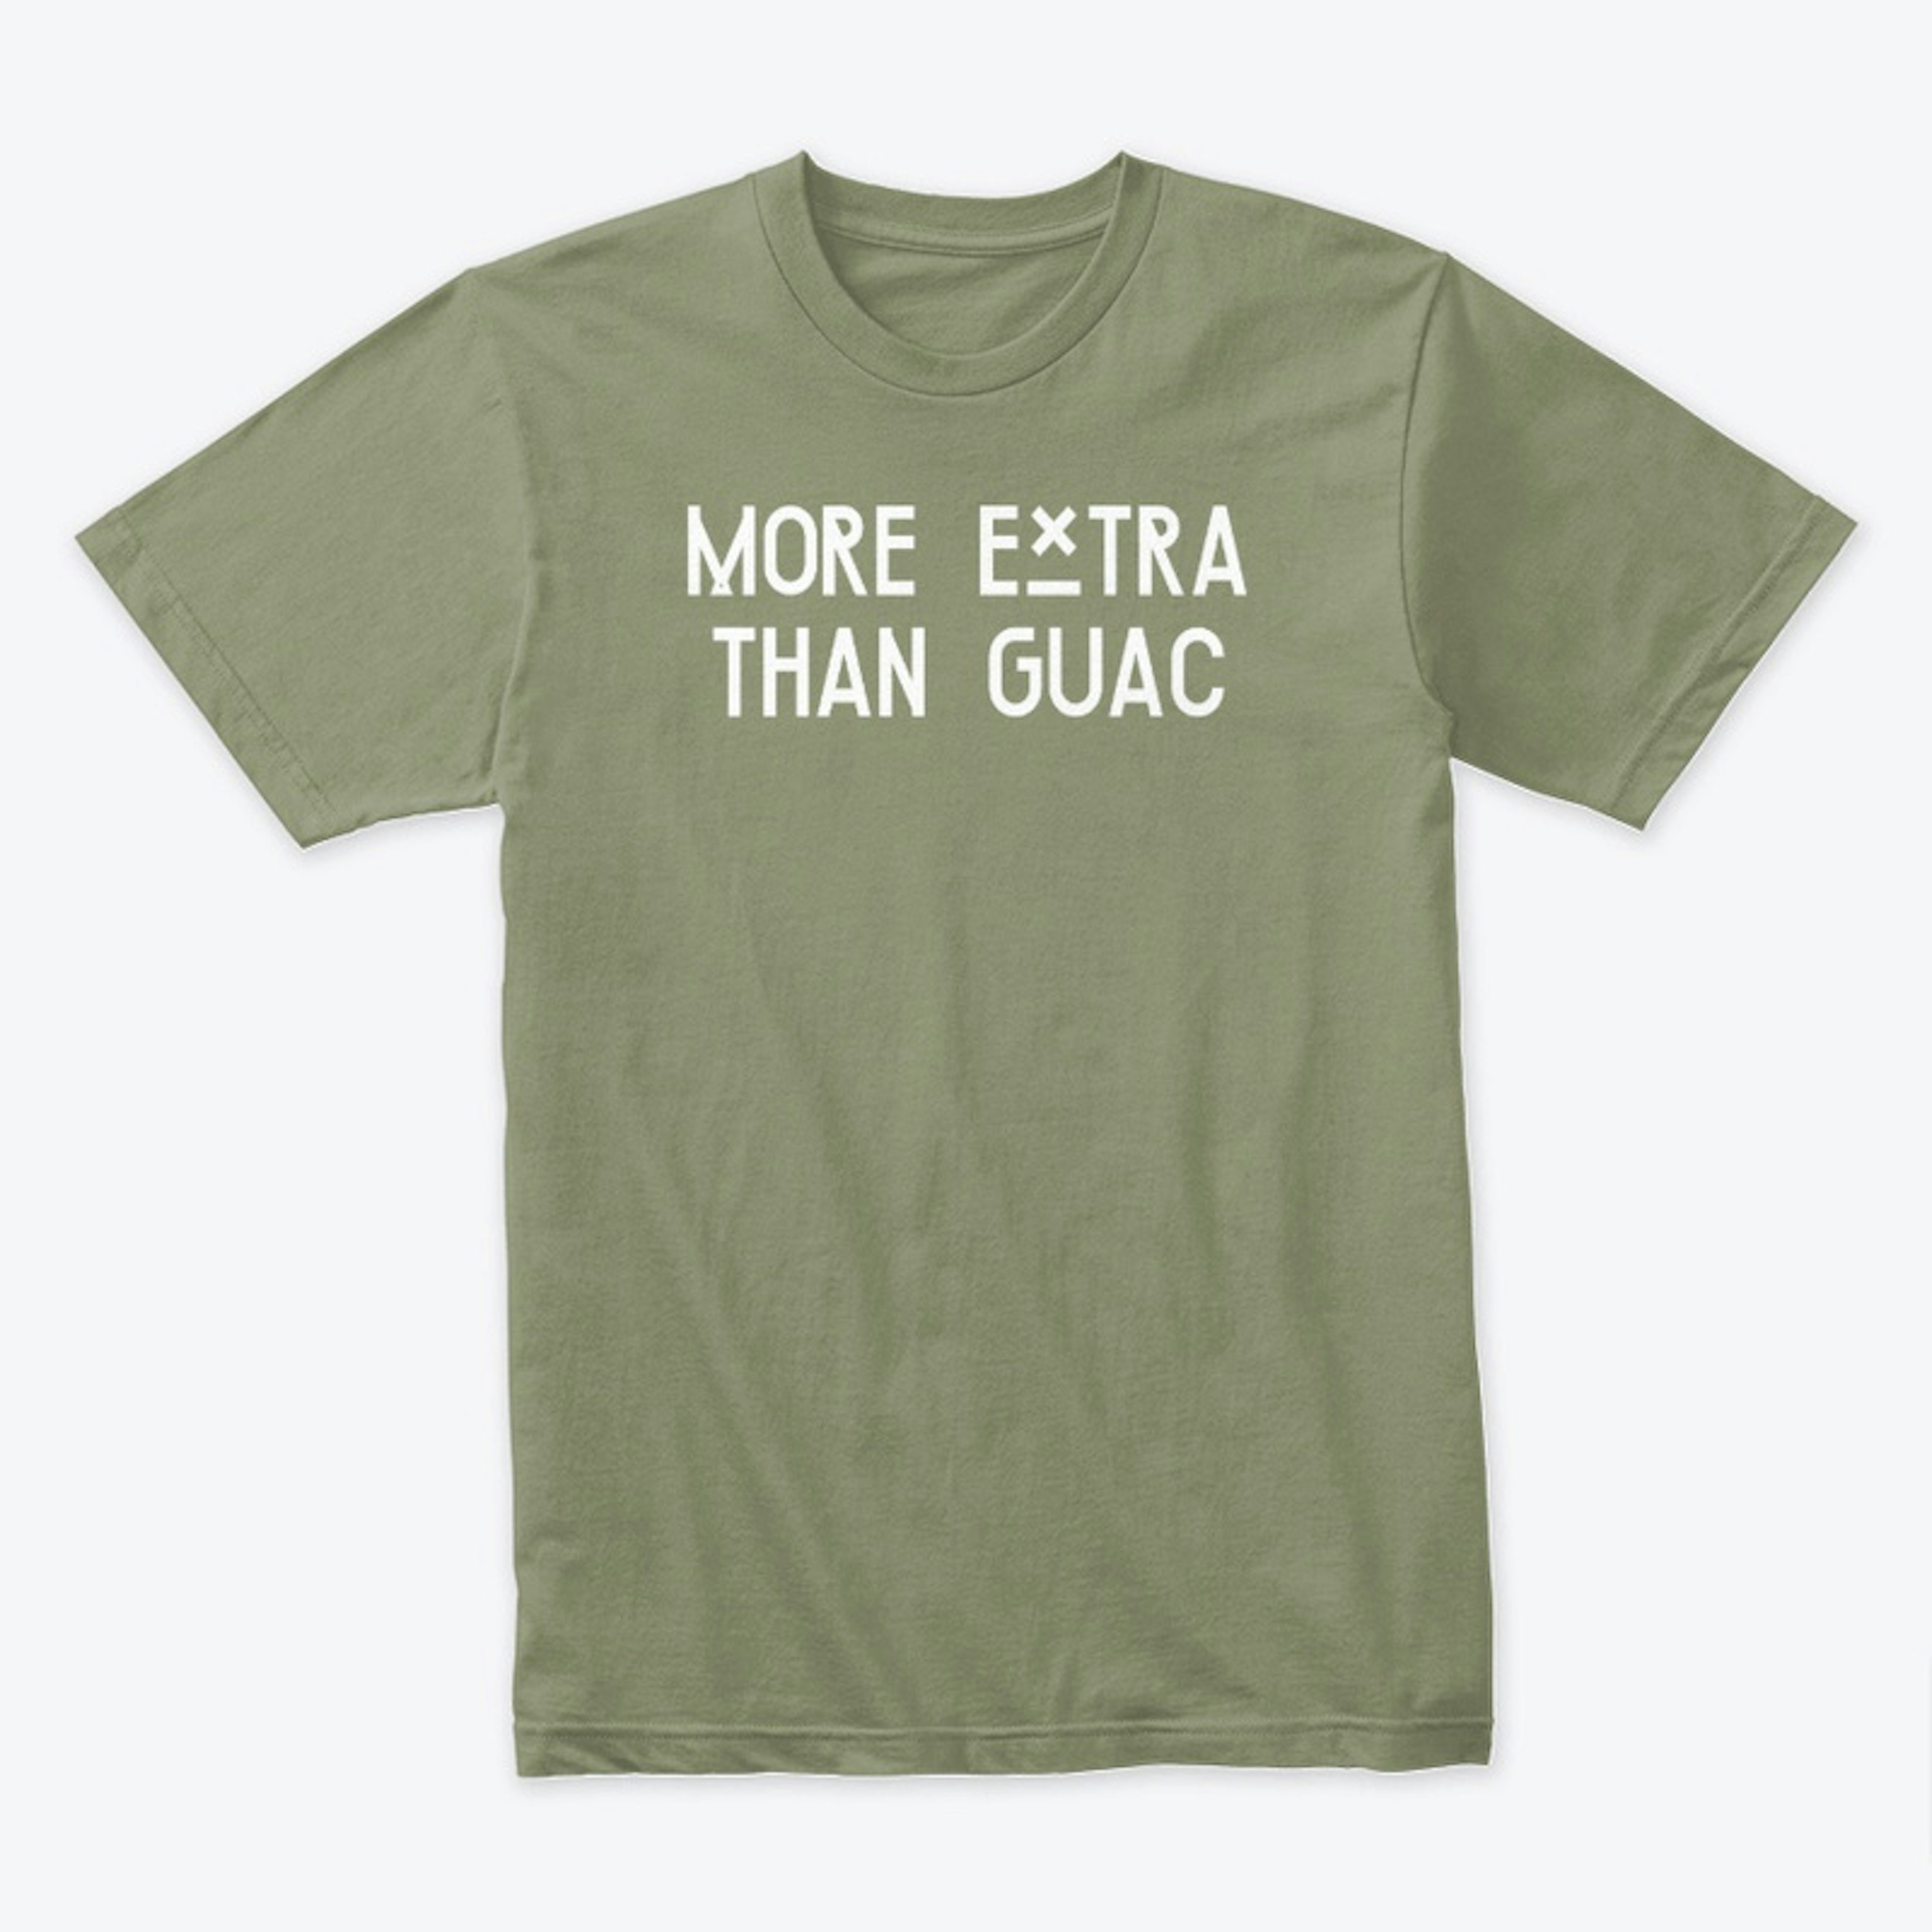 MORE EXTRA THAN GUAC